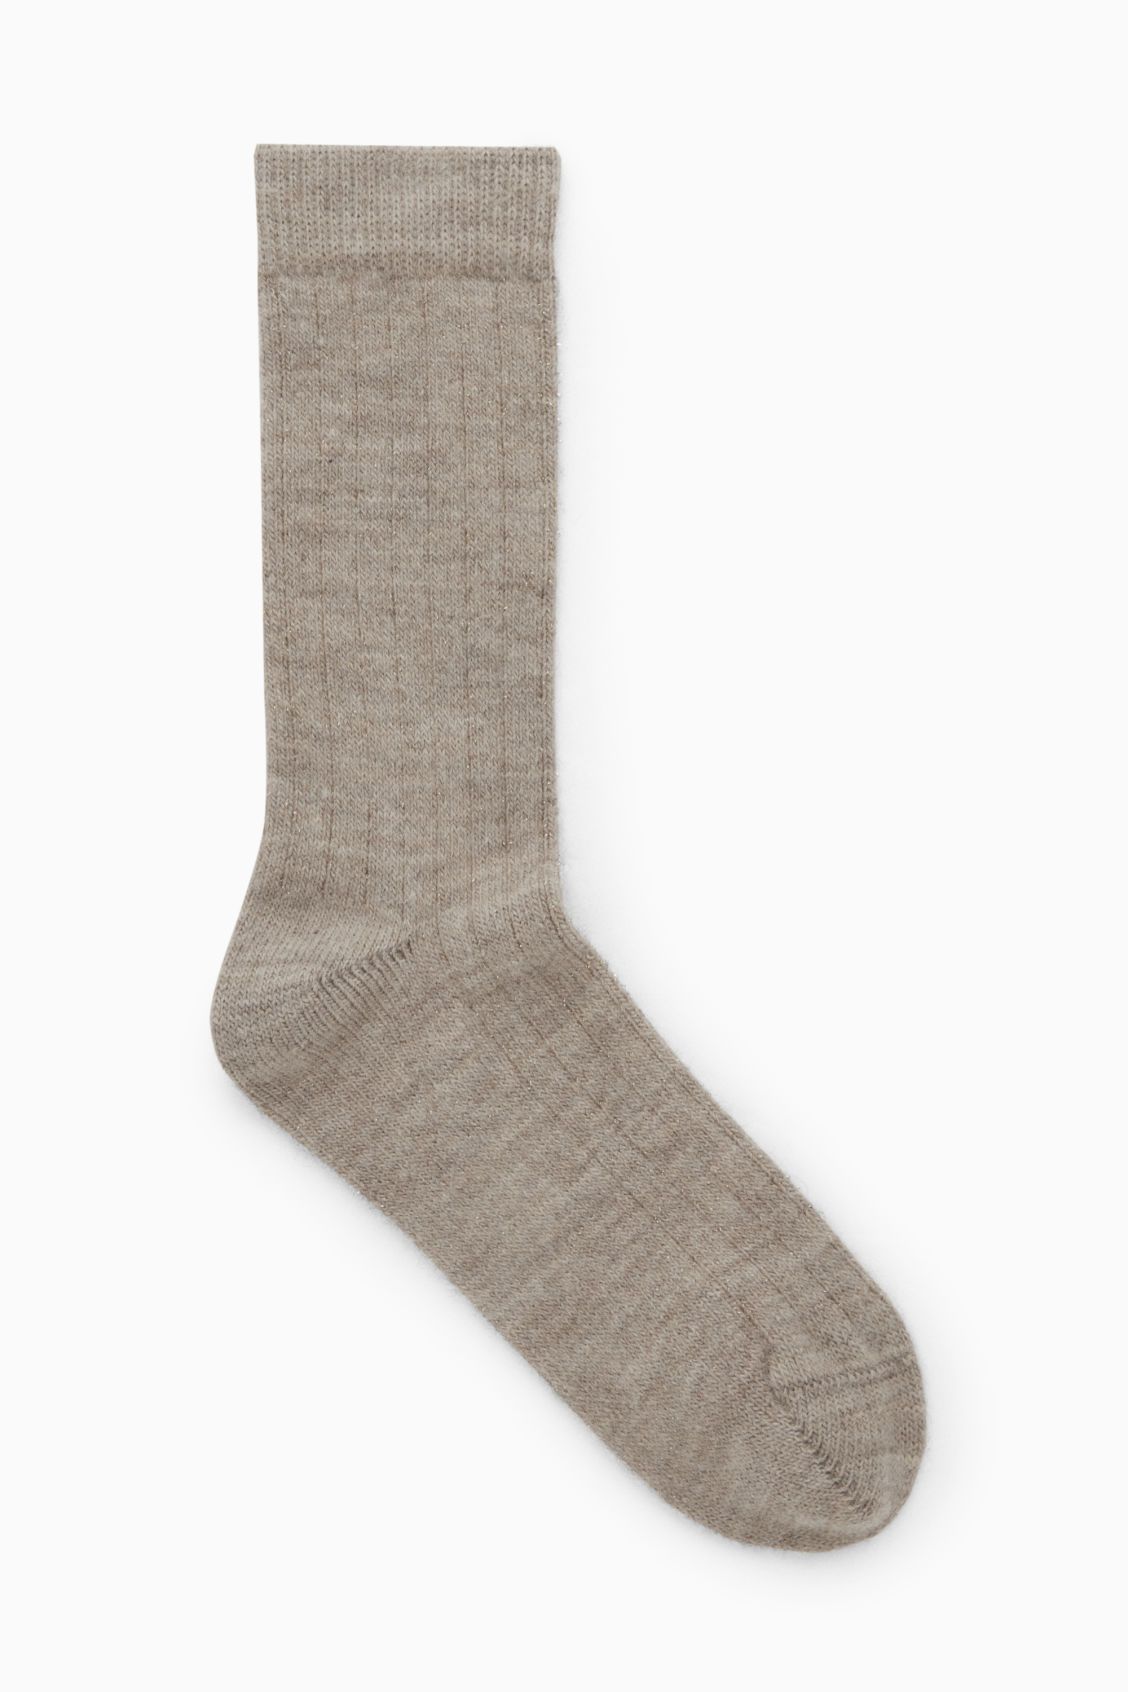 SPARKLY ANKLE SOCKS - BEIGE - COS | COS UK